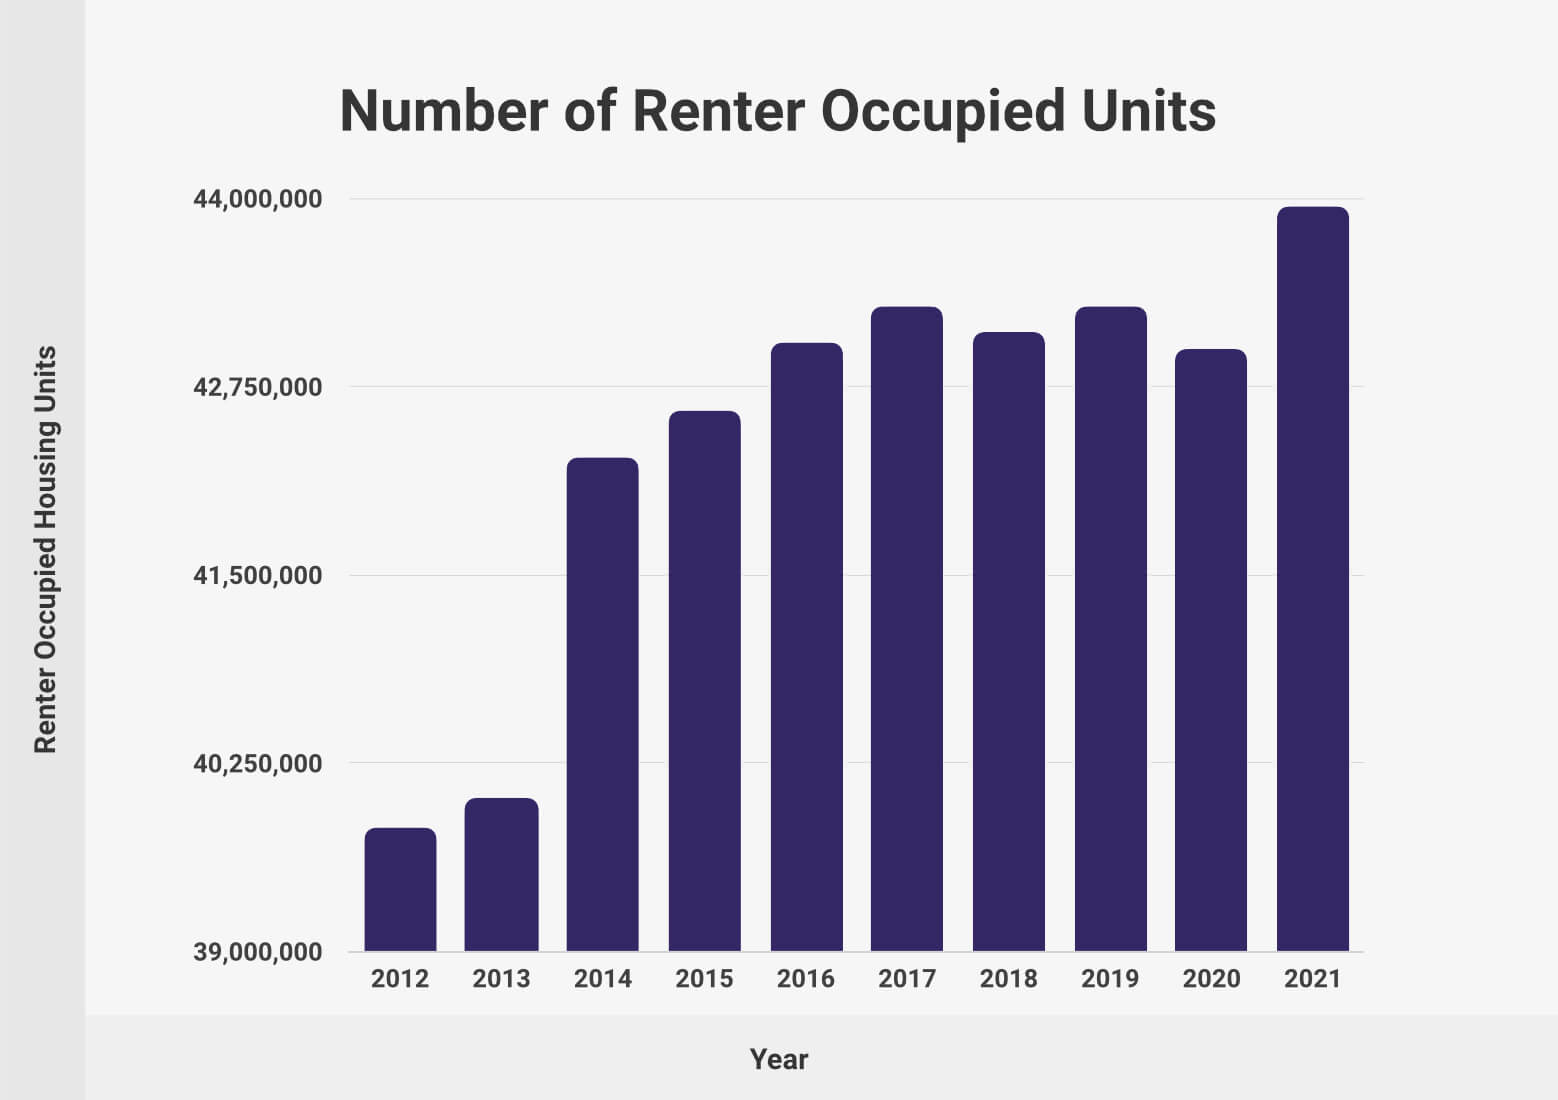 Number of Renter Occupied Units United States